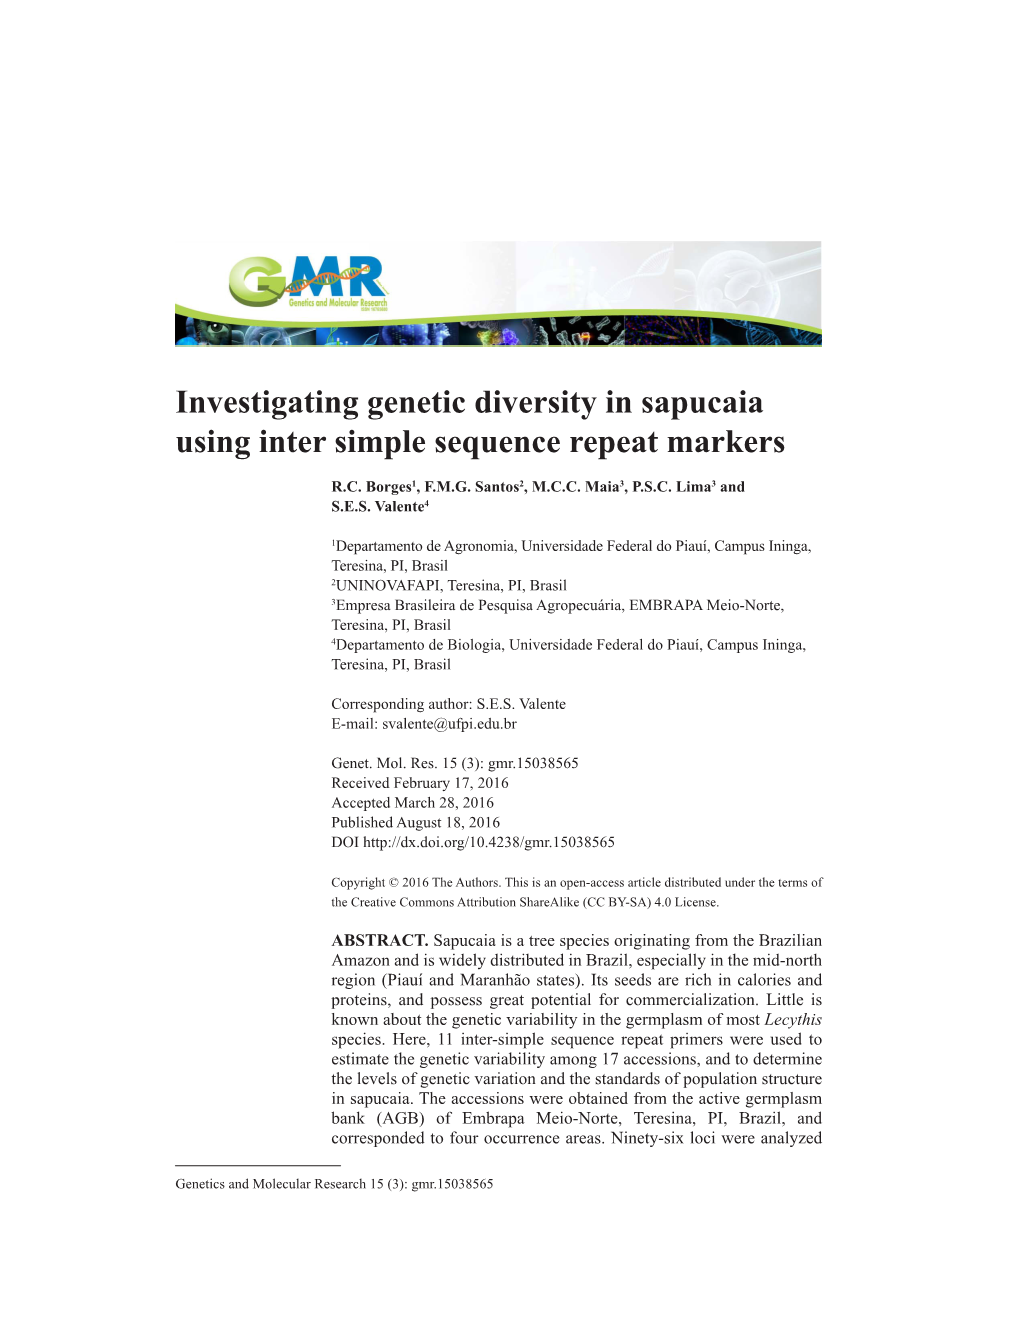 Investigating Genetic Diversity in Sapucaia Using Inter Simple Sequence Repeat Markers